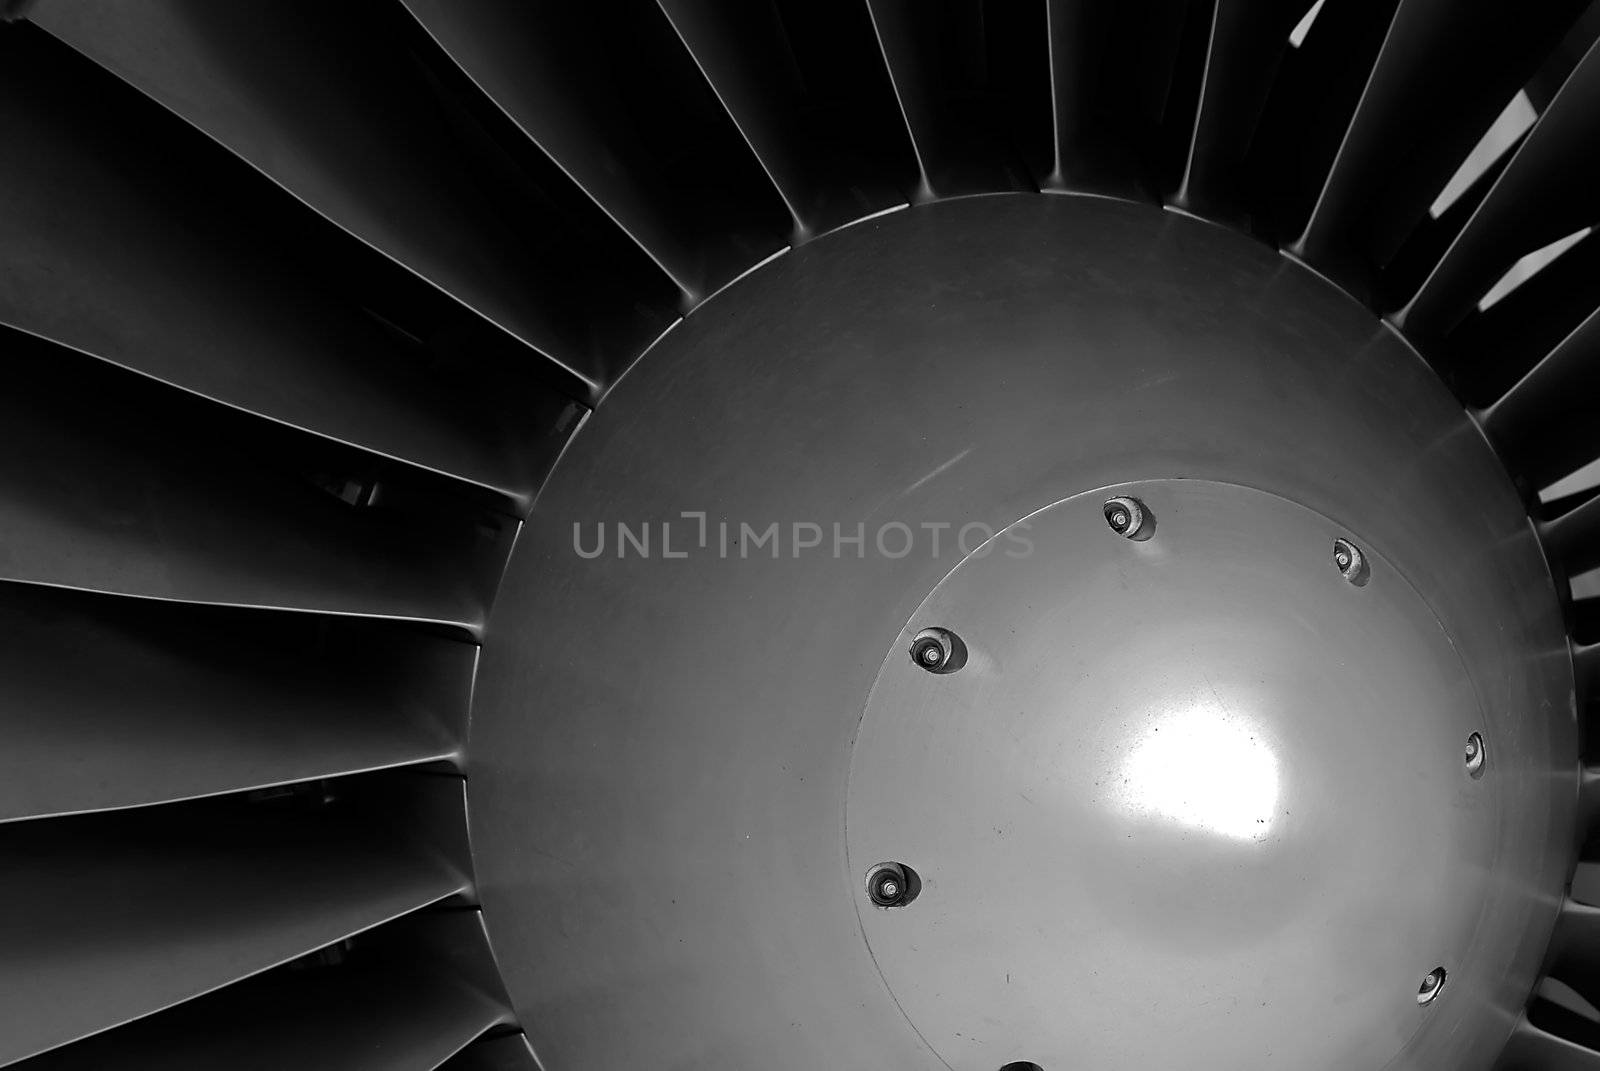 The center hub of a turbofan (jet) engine, a powerful symbol of industry and technology